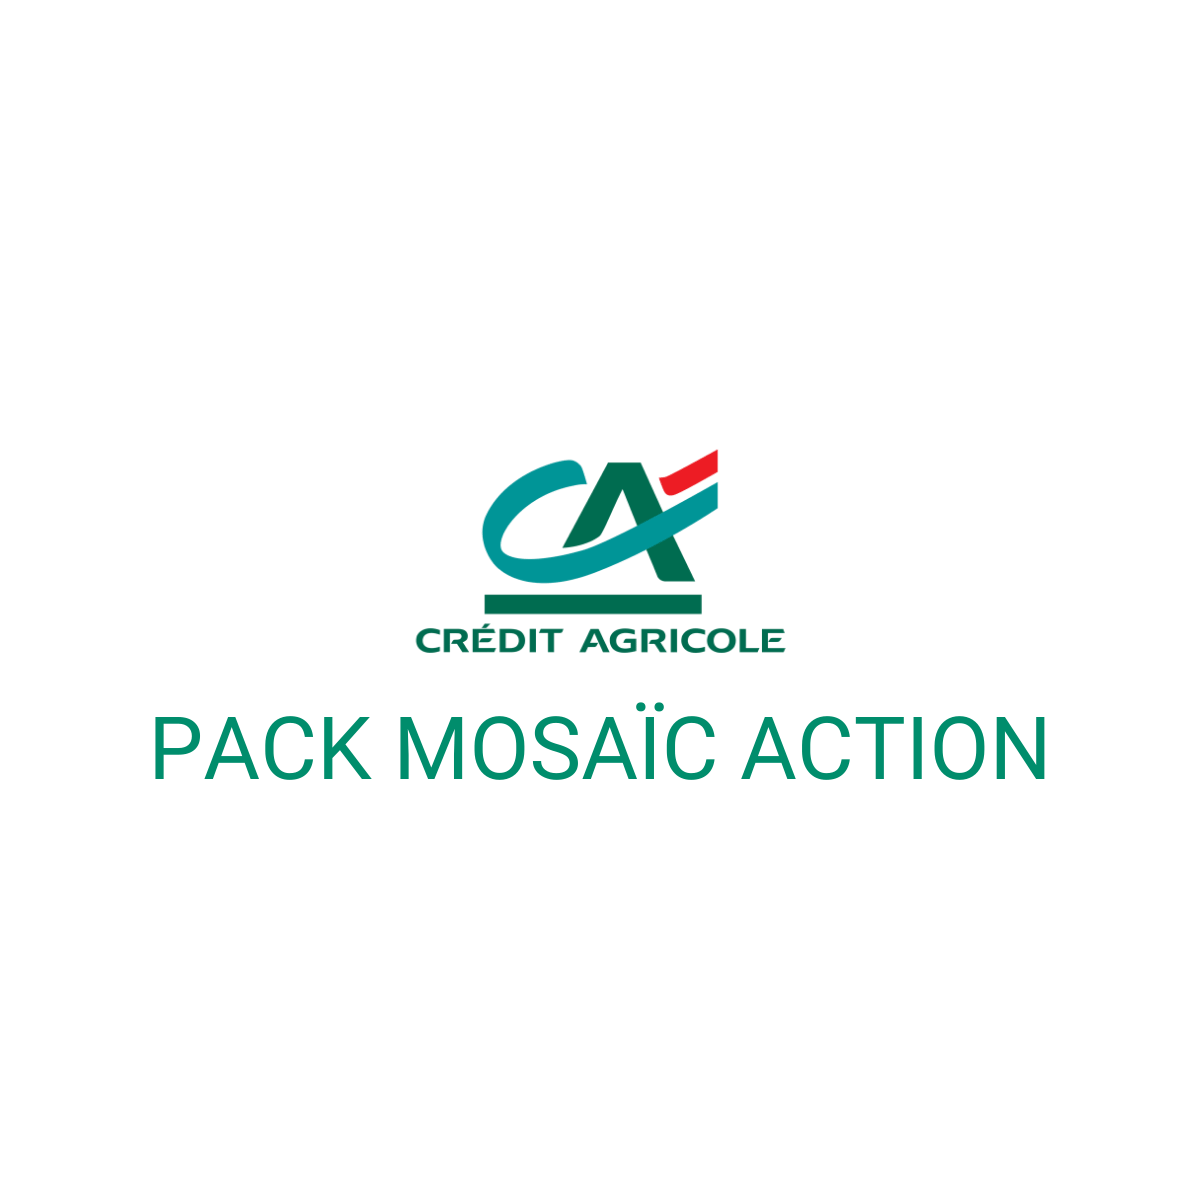 PACK MOZAÏC ACTION